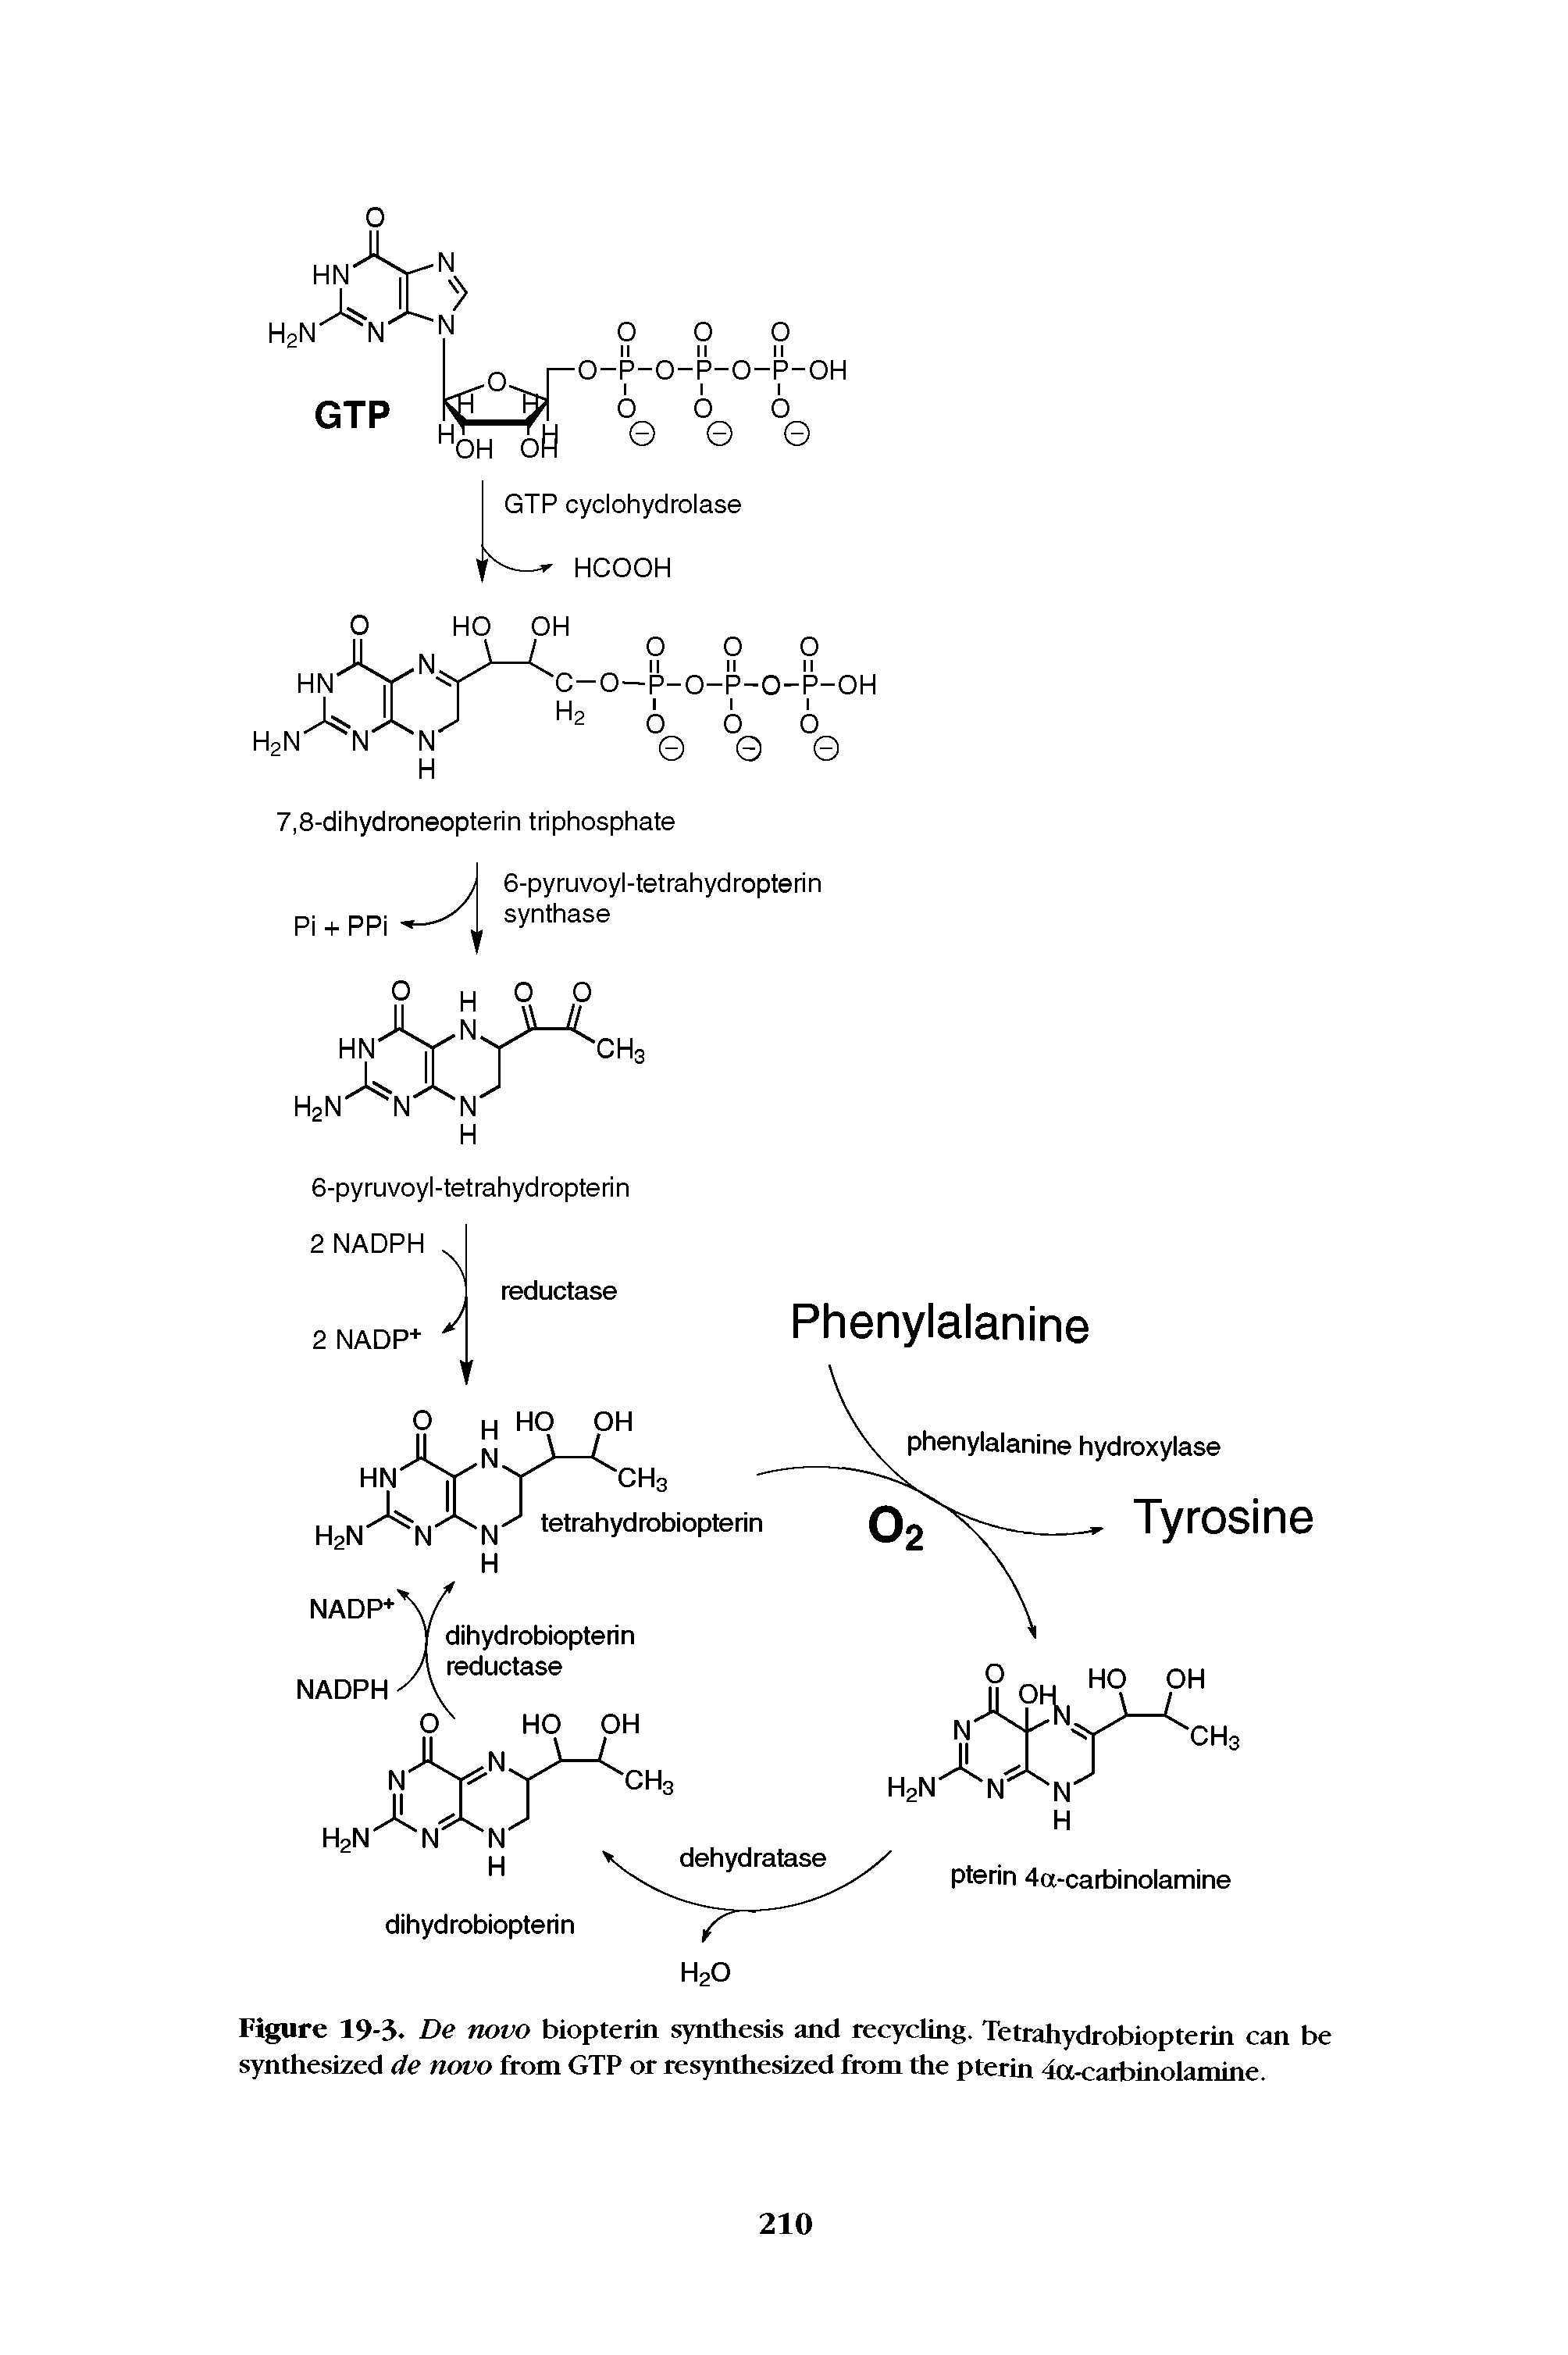 Figure 19-3. De novo biopterin synthesis and recycling. Tetrahydrobiopterin can be synthesized de novo from GTP or resynthesized from the pterin 4a-carbinolamine.